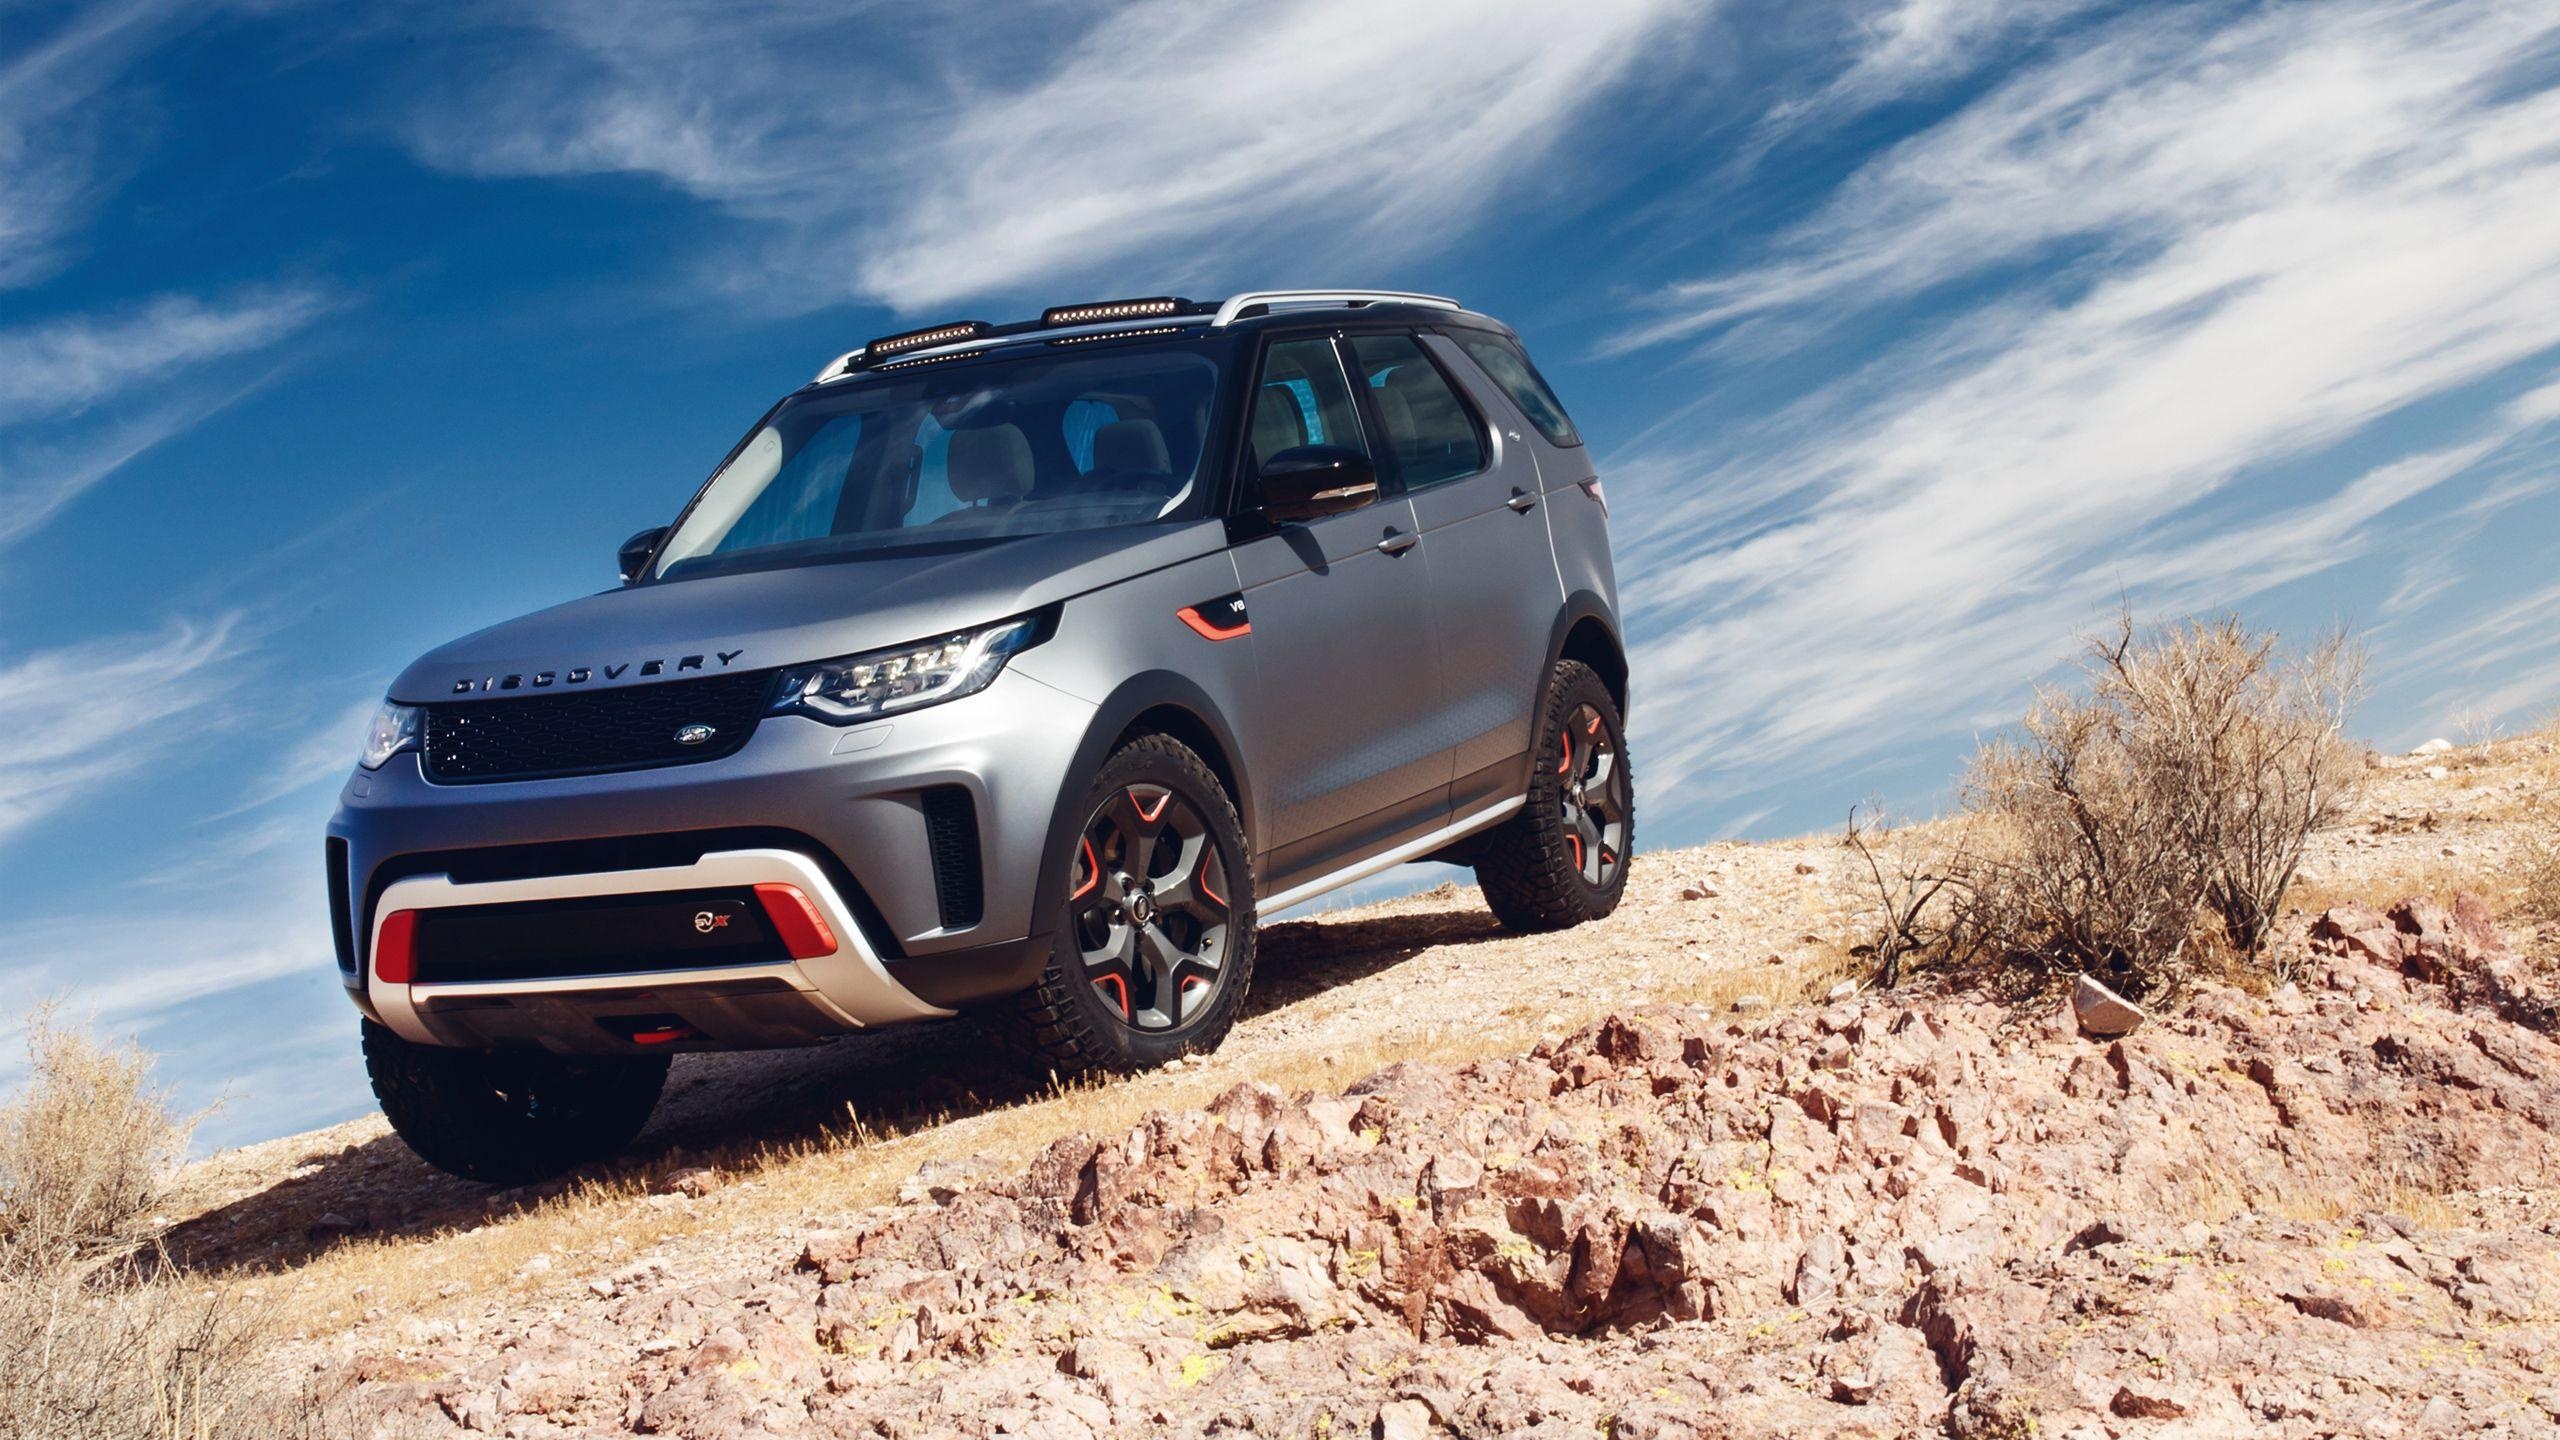 Land Rover Discovery, Scenic wallpapers, Stunning landscapes, Adventure, 2560x1440 HD Desktop